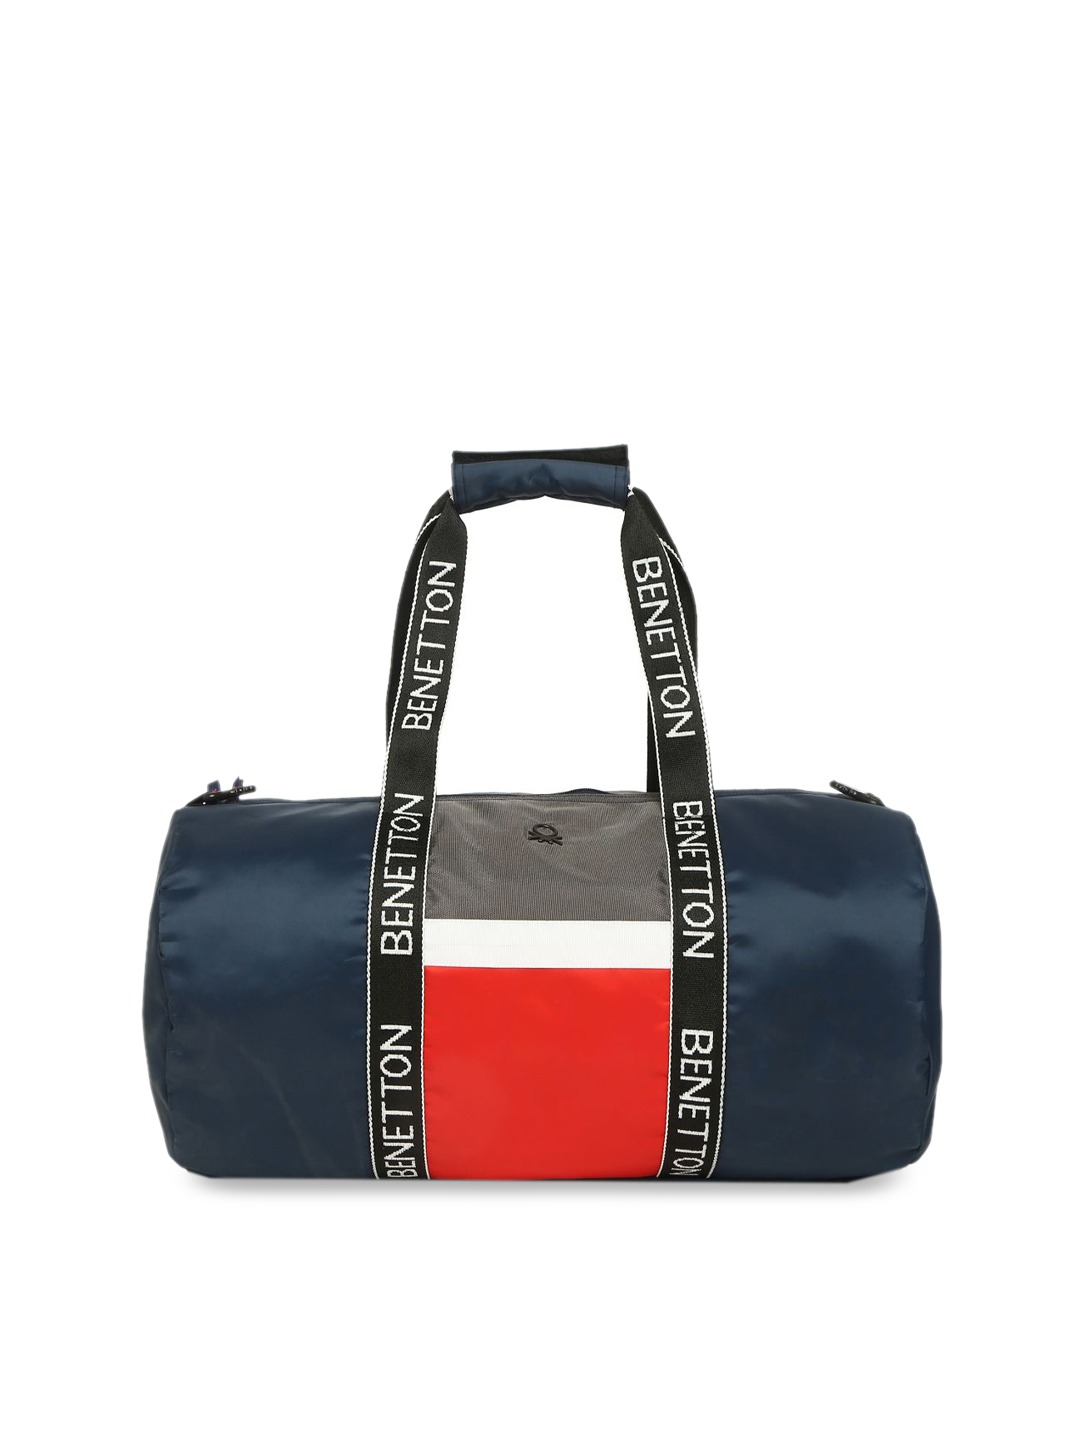 Accessories Duffel Bag | United Colors of Benetton Unisex Navy Blue Solid Small Duffel Bag - HP53244